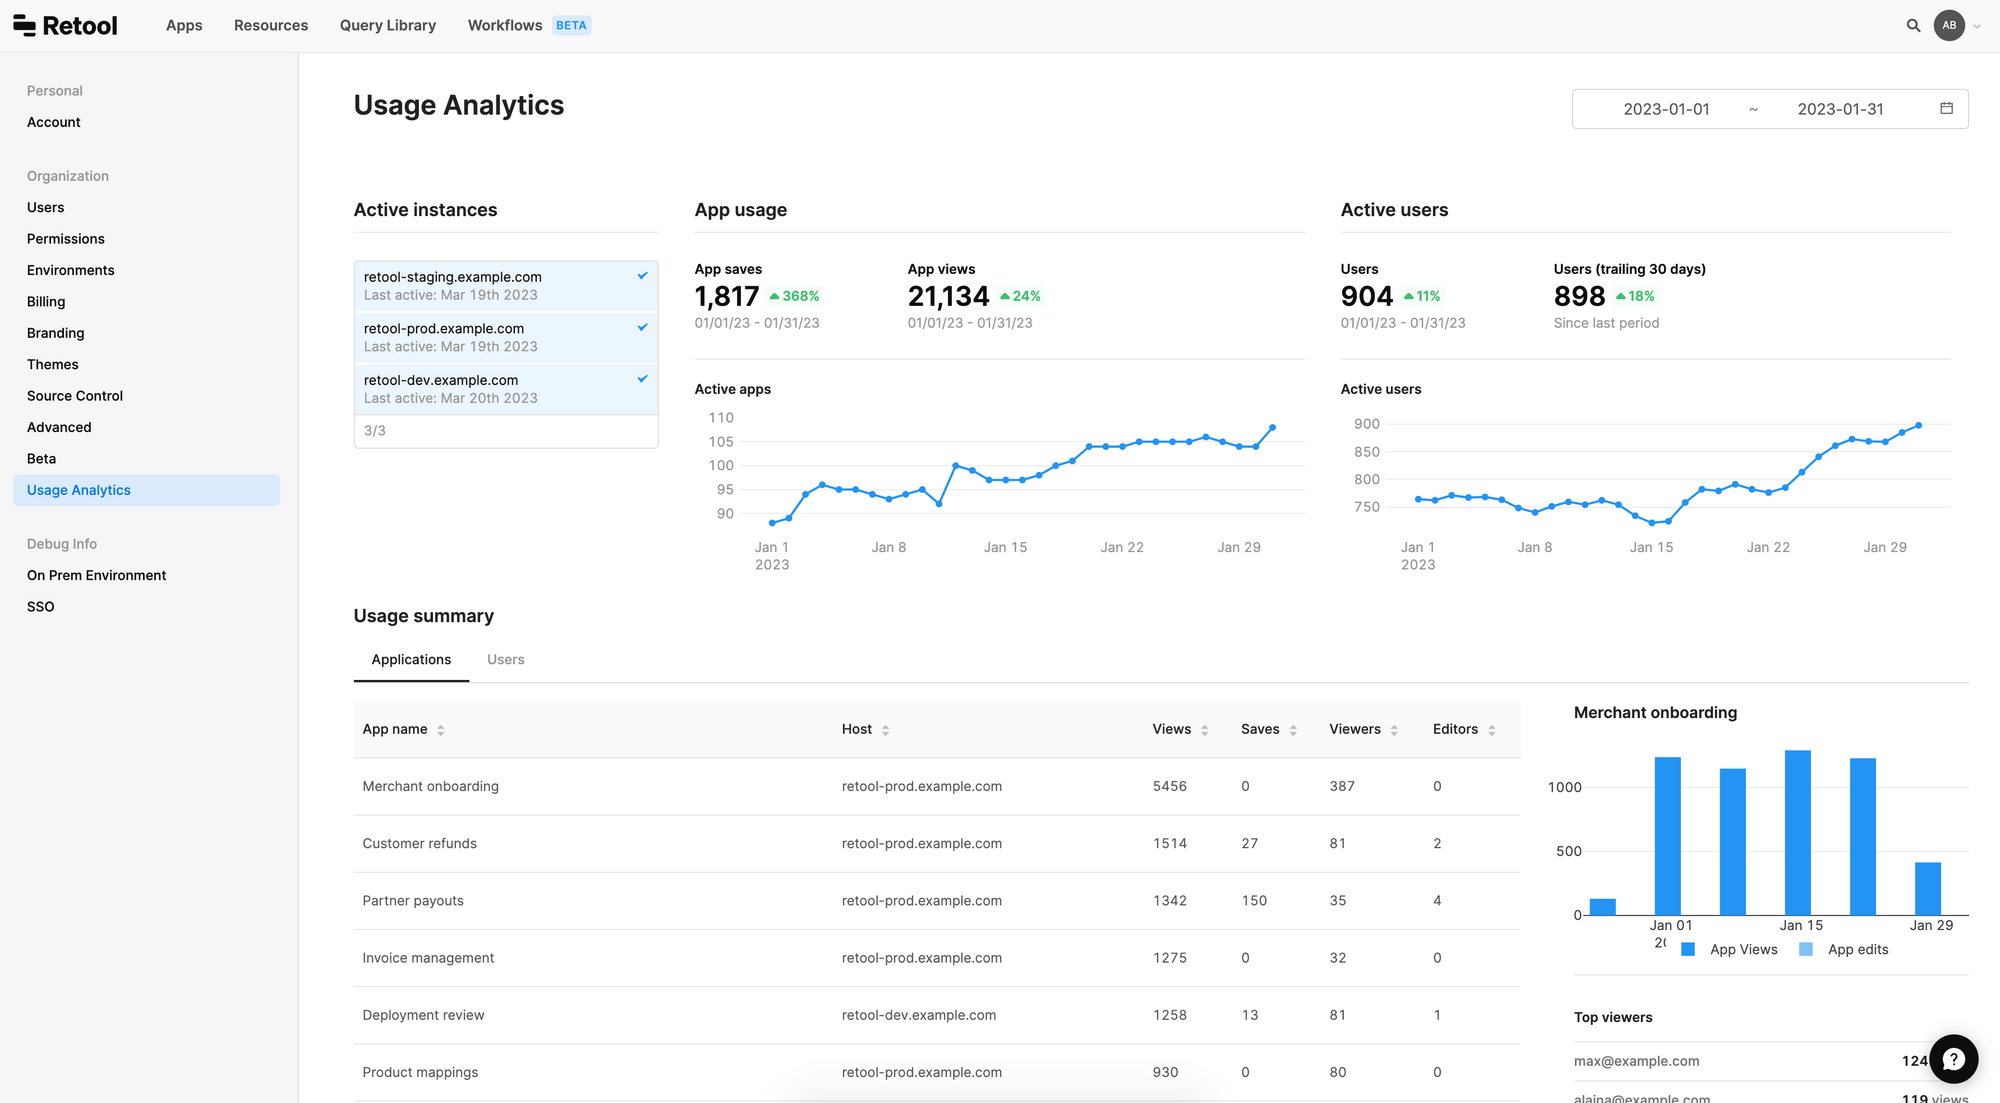 An image of the Usage Analytics dashboard. 